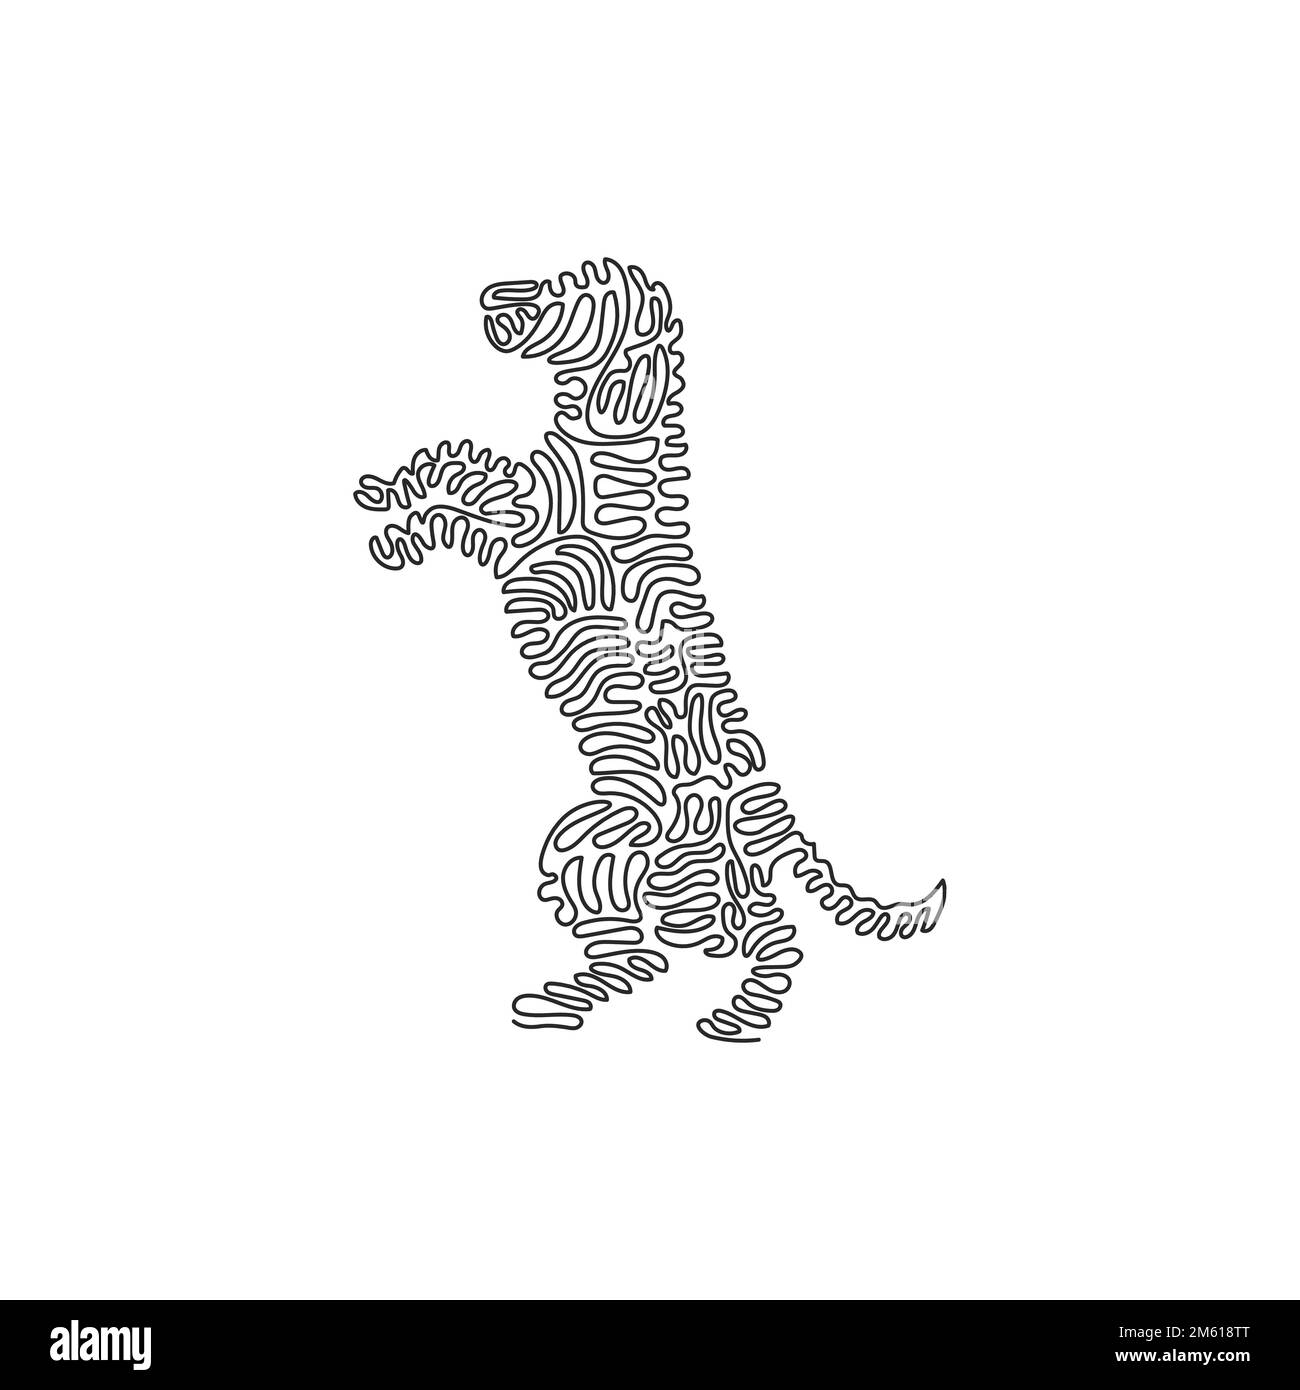 Single one curly line drawing of a cute dog standing abstract art. Continuous line drawing design vector illustration of dogs, friendly pets animal Stock Vector